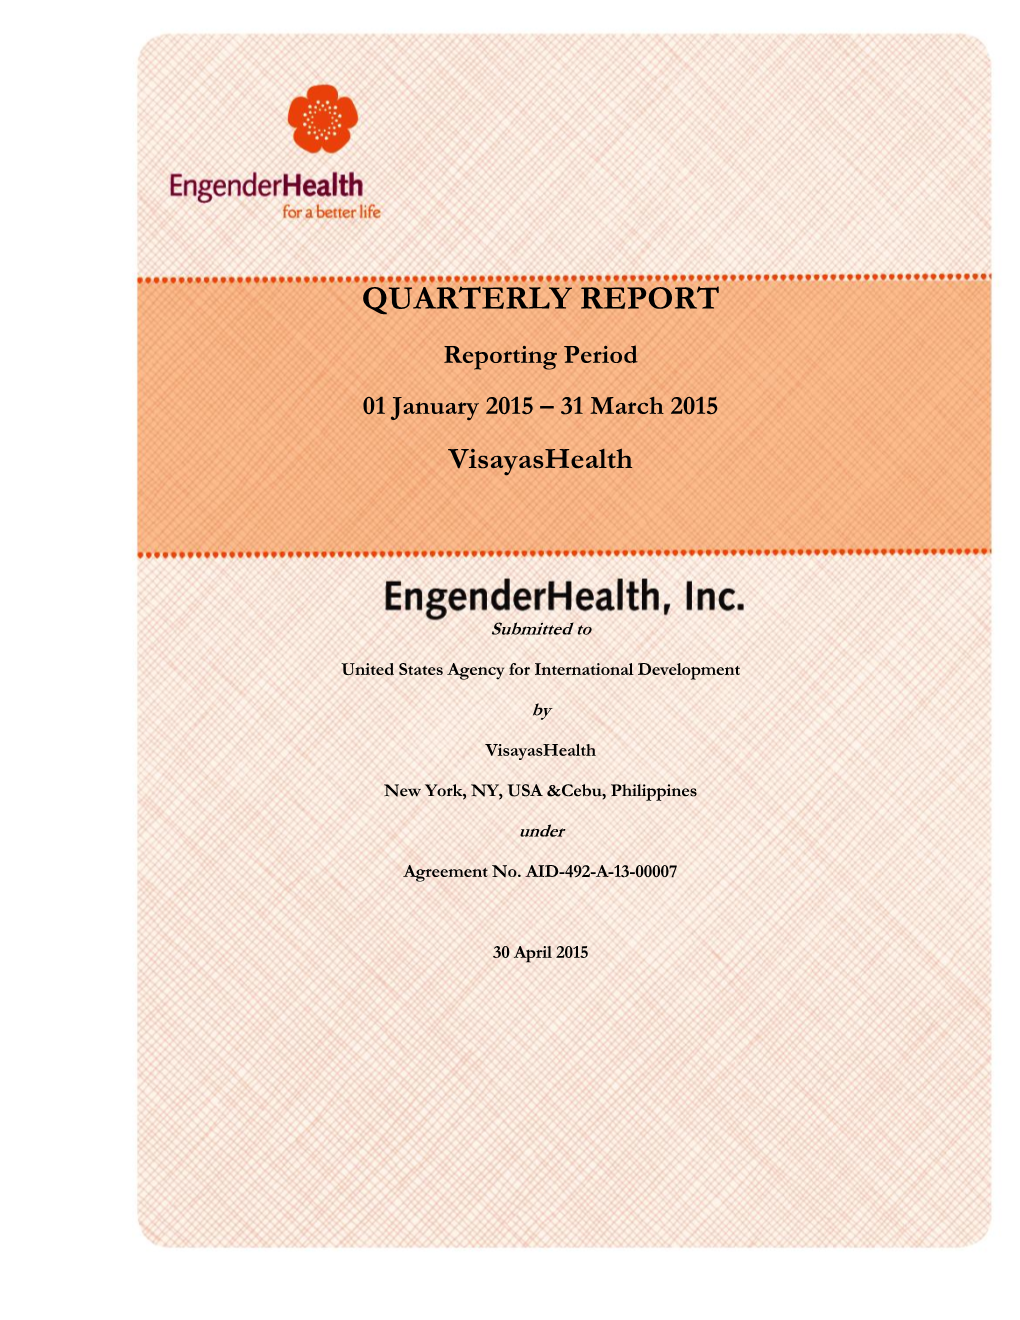 QUARTERLY REPORT Reporting Period 01 January 2015 – 31 March 2015 Visayashealth